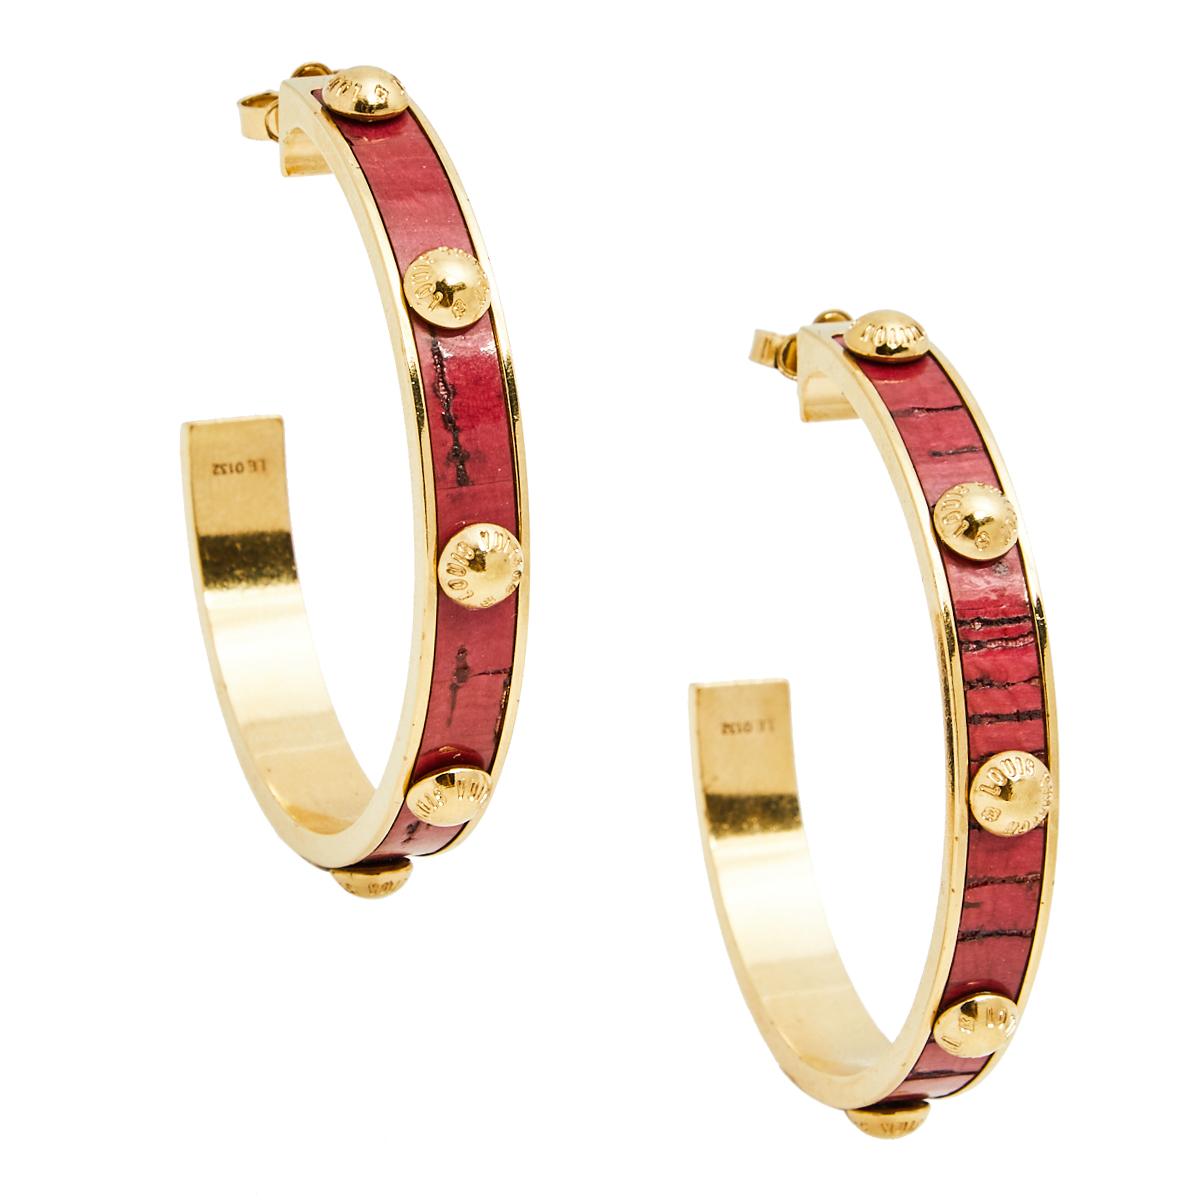 A feminine flair and a chic appeal characterize these stunning earrings. Sculpted from gold-tone metal, they will look beautiful when you style them with your outfits and other accessories. This pair of Gimme A Clue earrings from the house of Louis